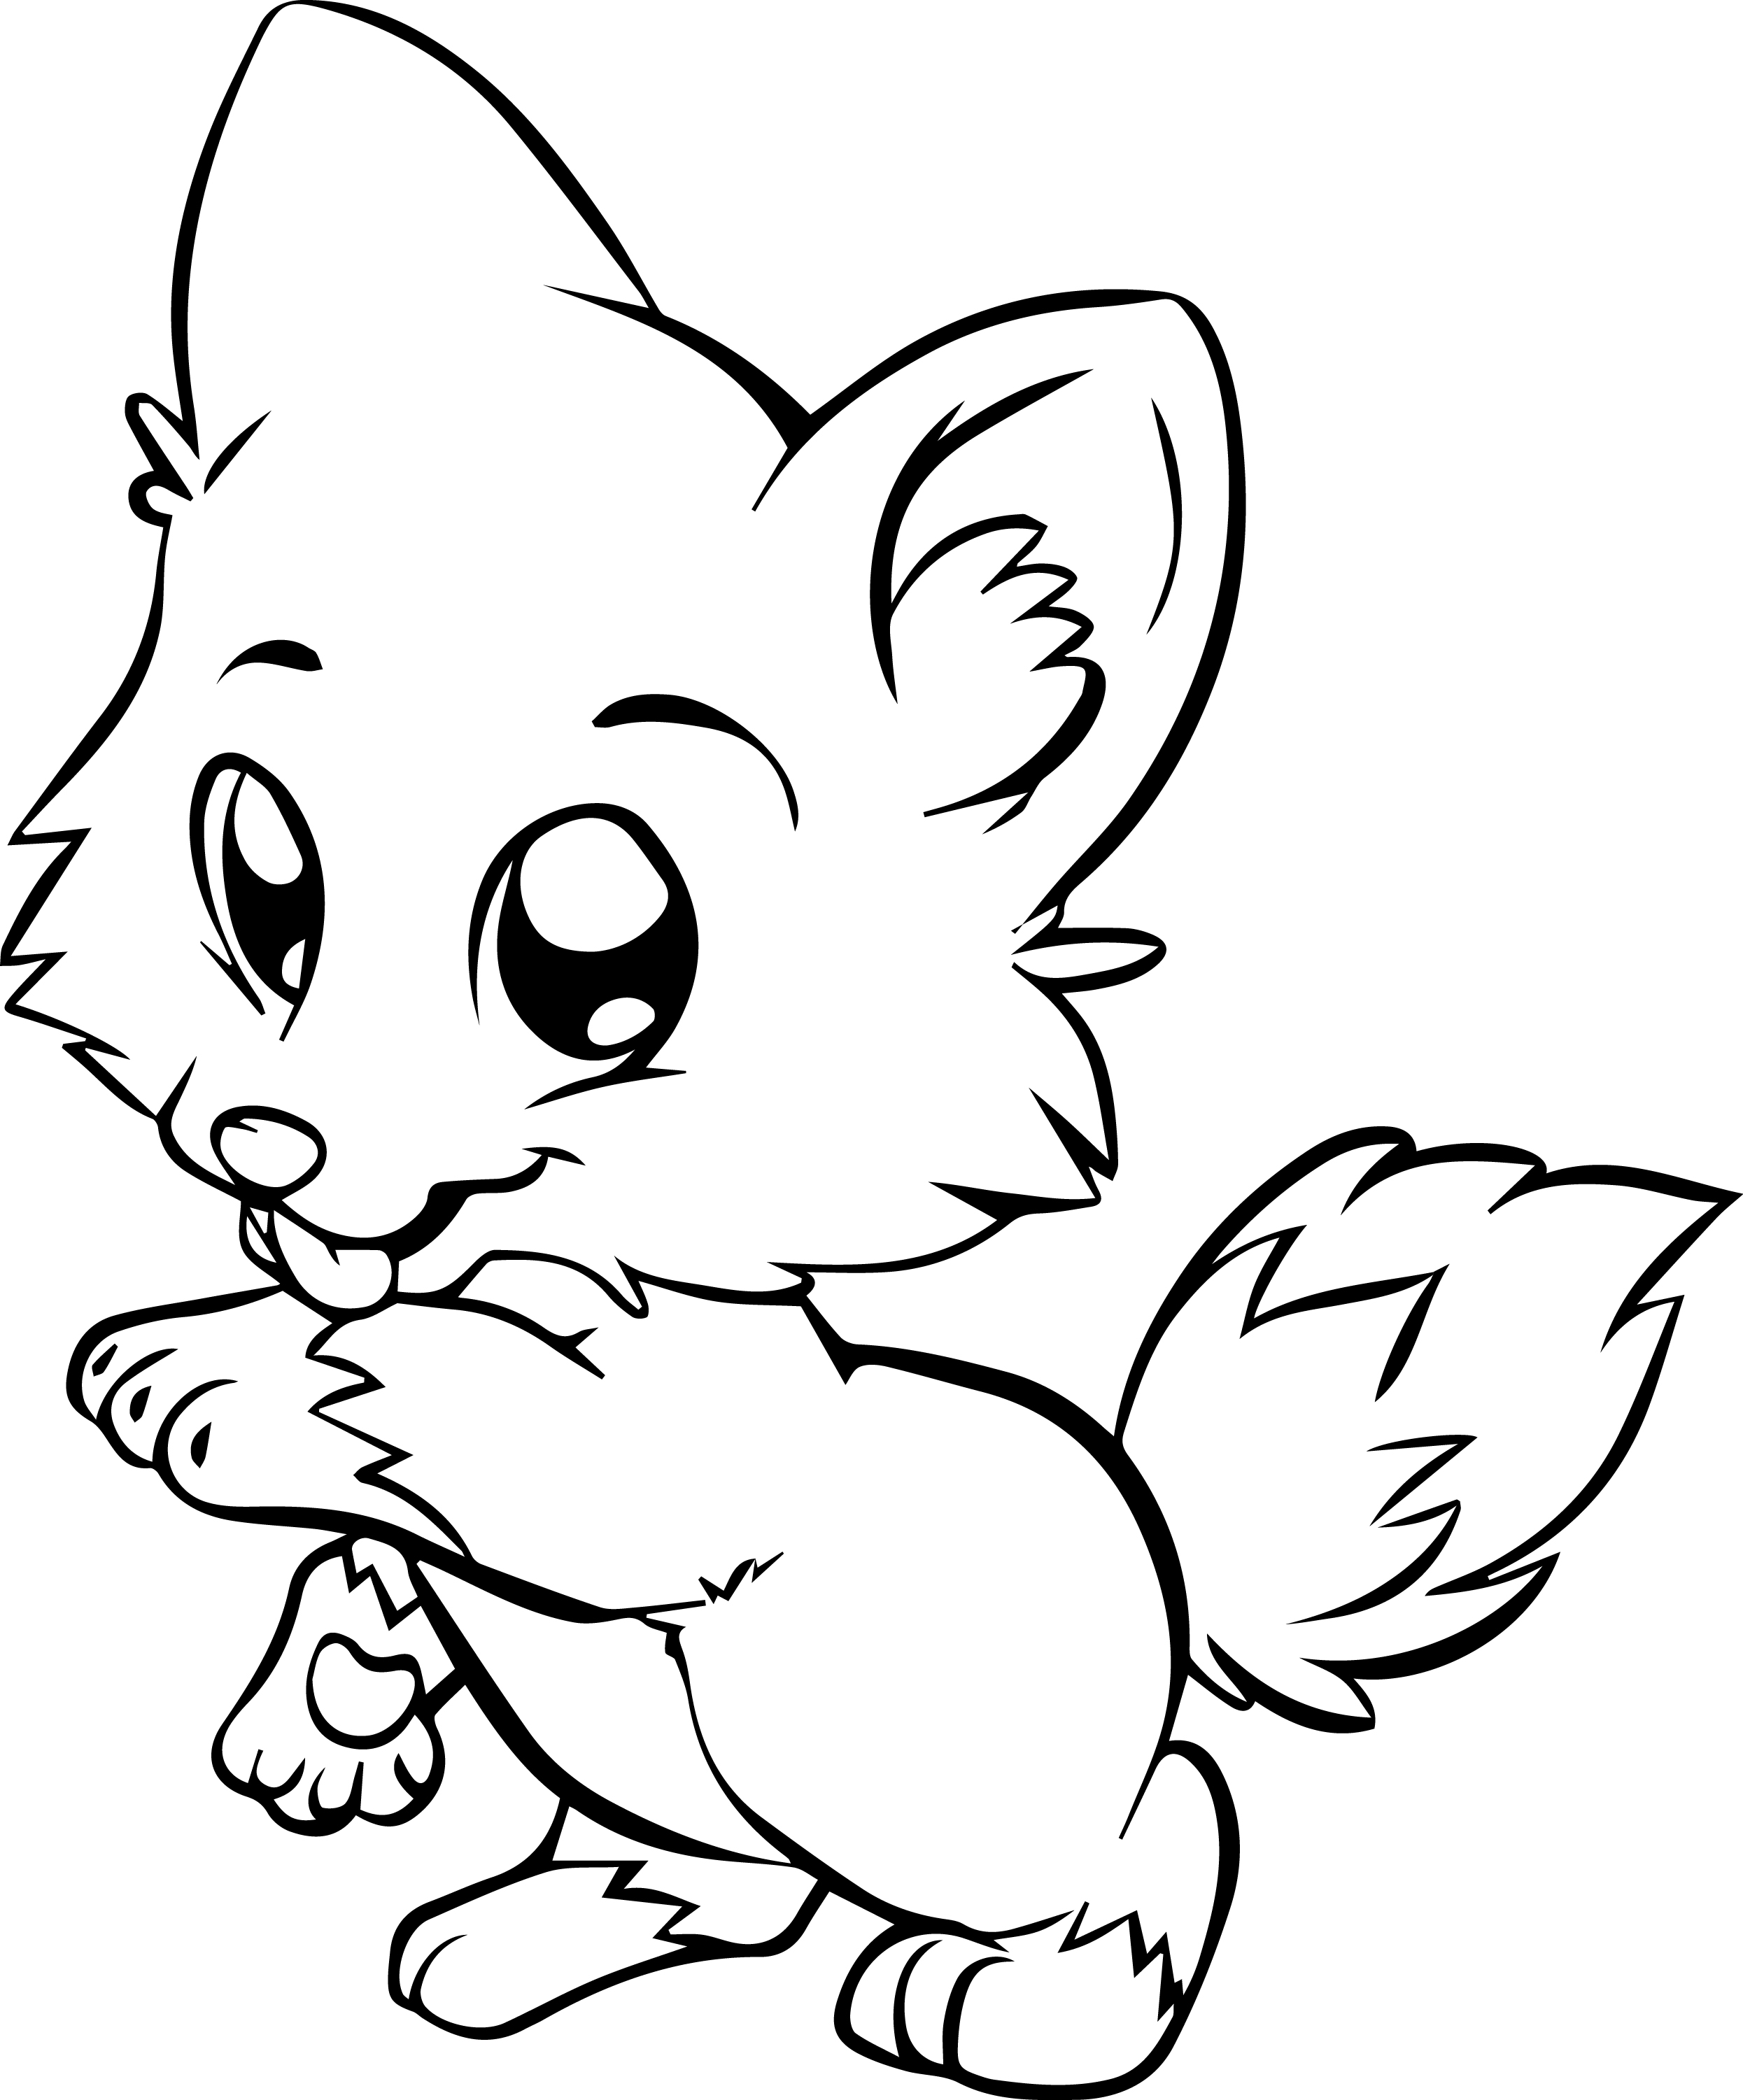 Coloring Pages Of Stuffed Animals Images Of Coloring Pages Of Stuffed Animals Sabadaphnecottage